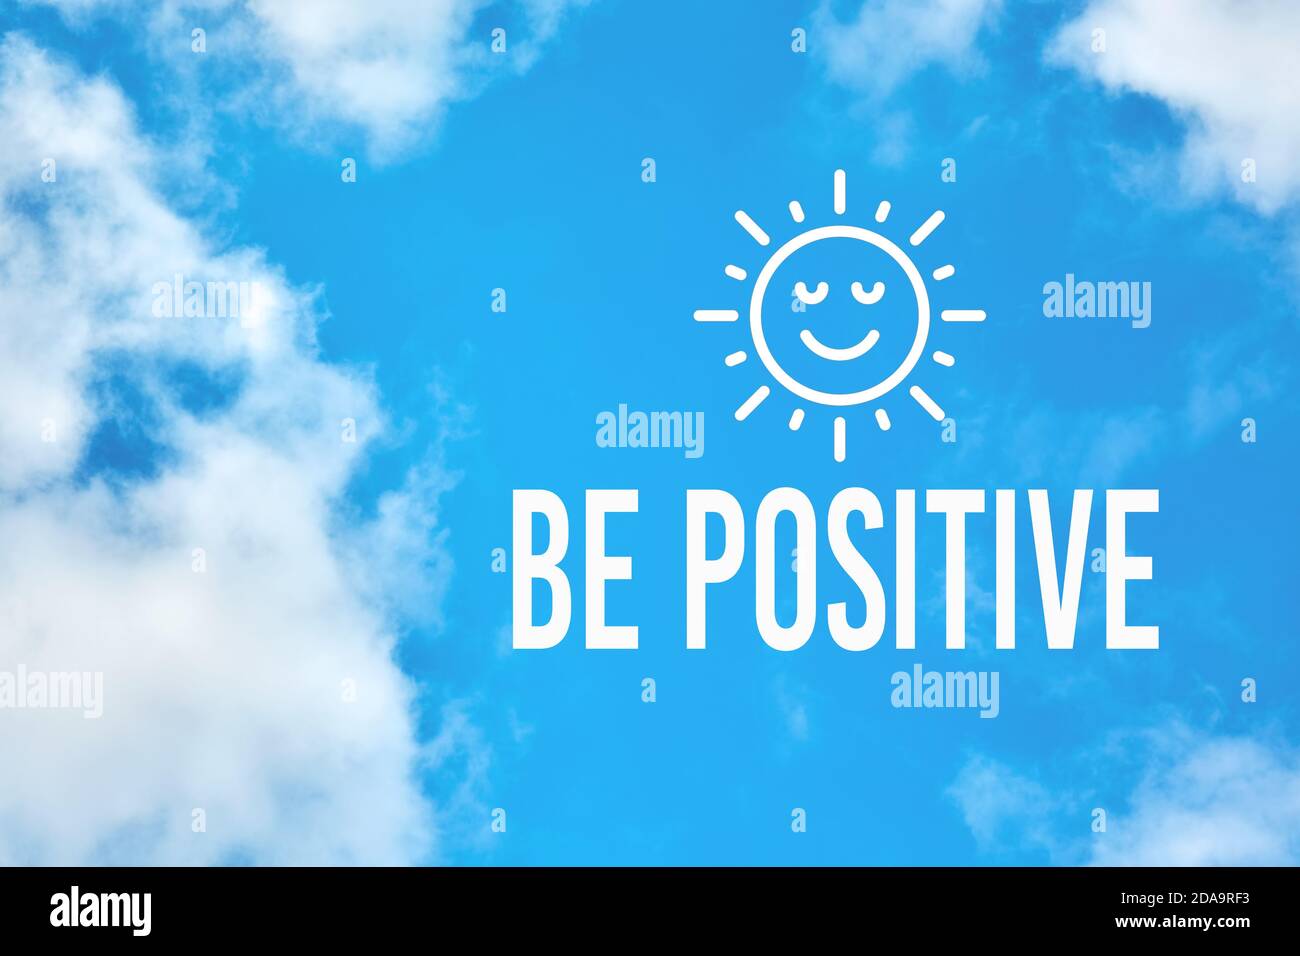 Be positive inspirational or motivational quote against blue sky with  clouds background. Positive thinking and attitude concept Stock Photo -  Alamy